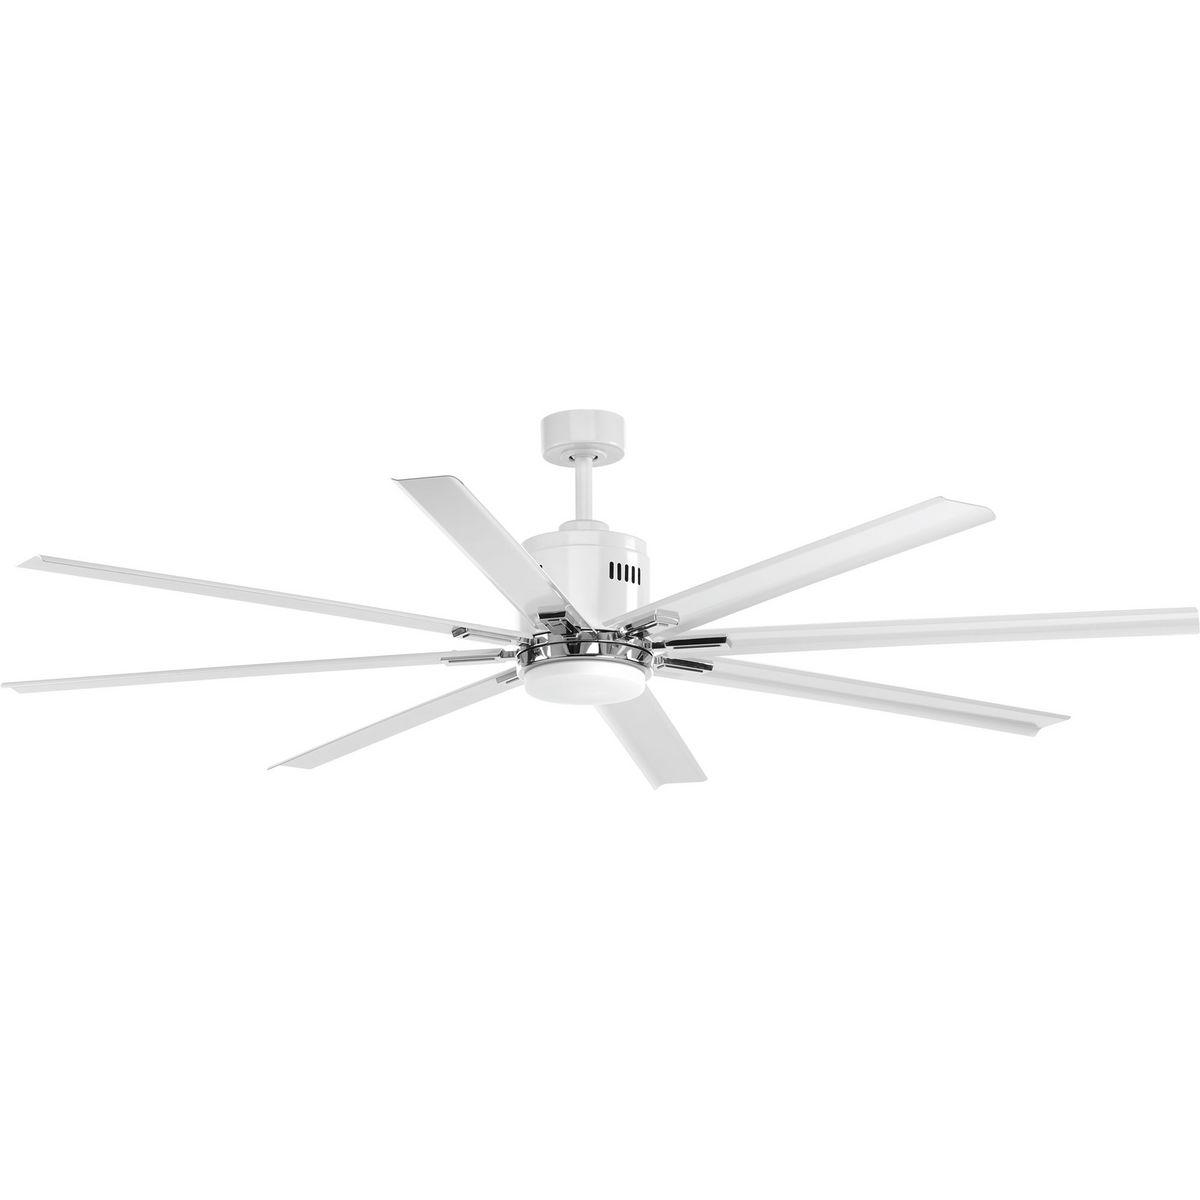 Hubbell P2550-3030K Beautiful and expansive in design, the 72 inch Vast ceiling fan is ideal for use in large areas and outdoor covered areas for maximum cooling. A white opal shade complements a White finish with Chrome Accents and white blades. Featuring an energy efficien